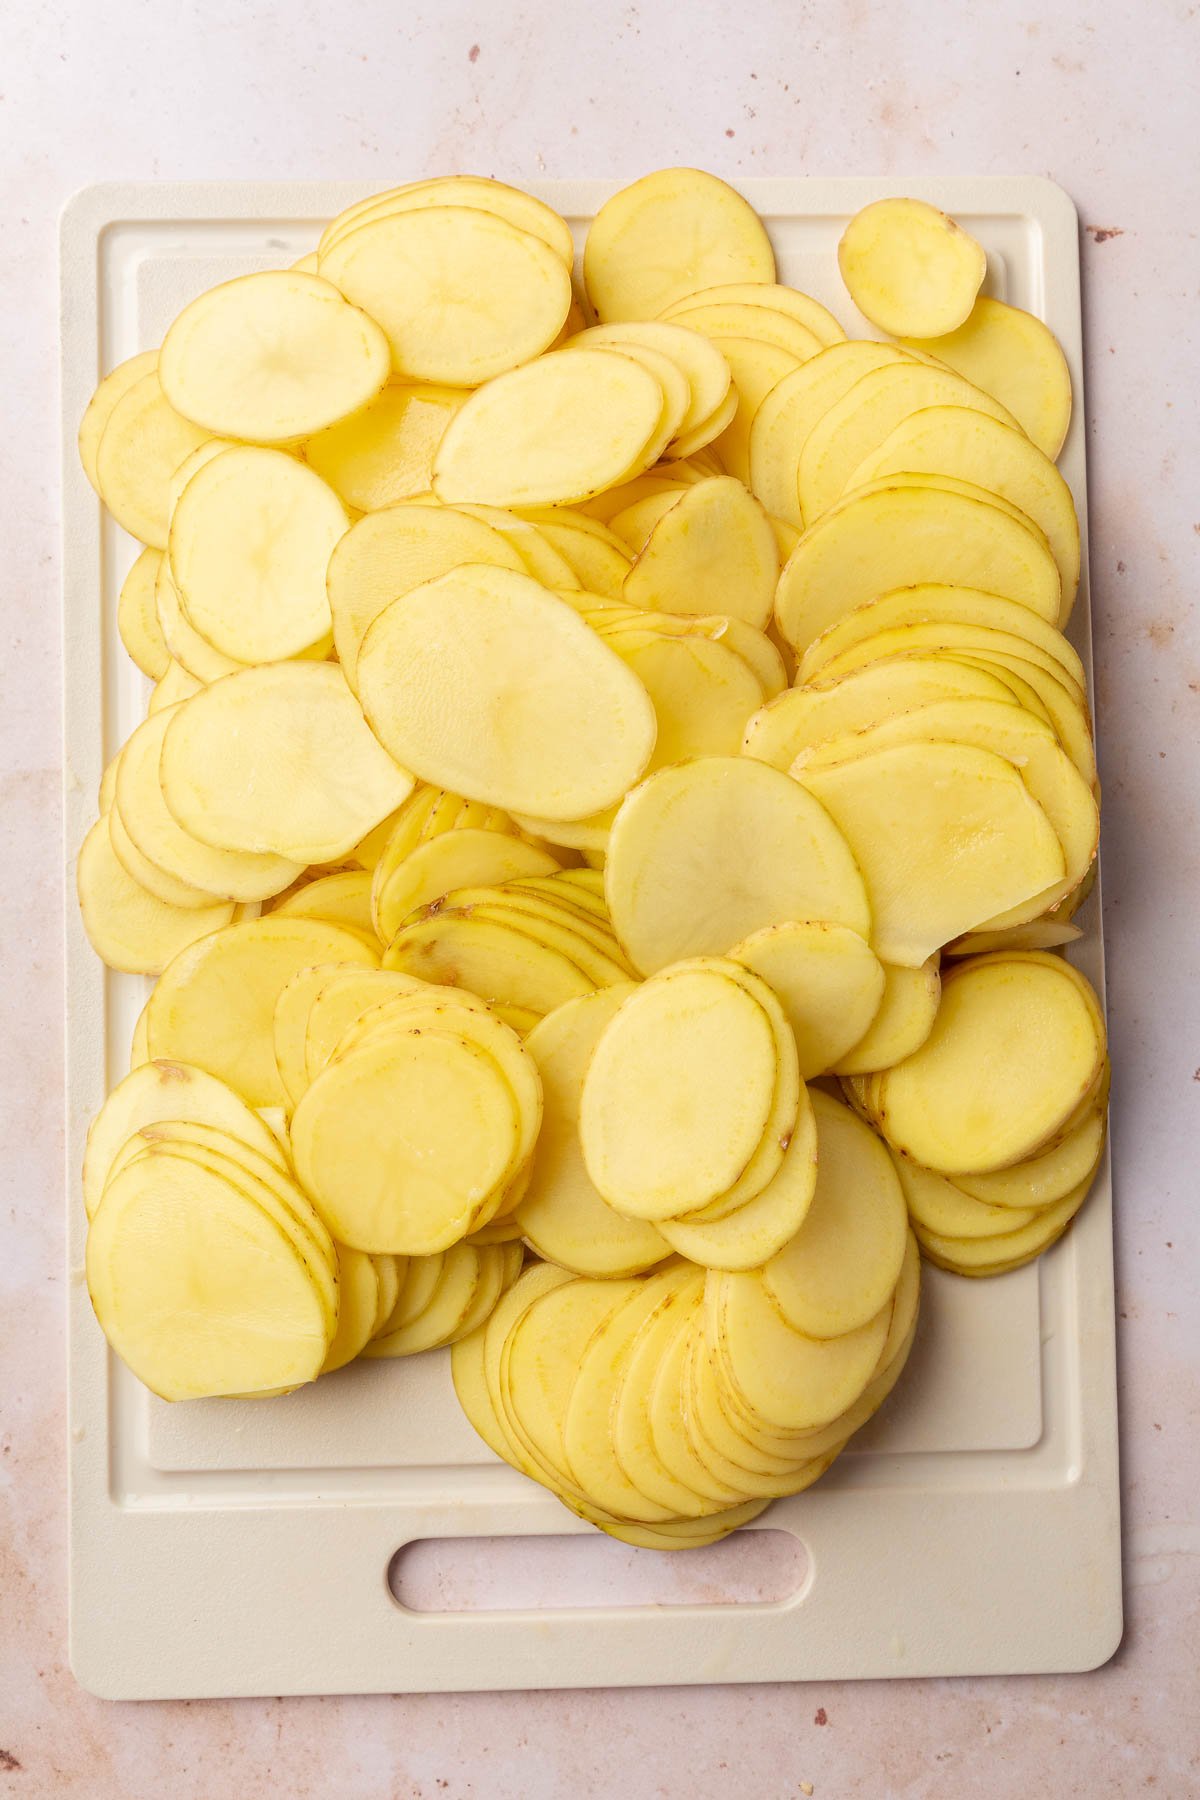 Slices of yukon gold potatoes on a cutting board.